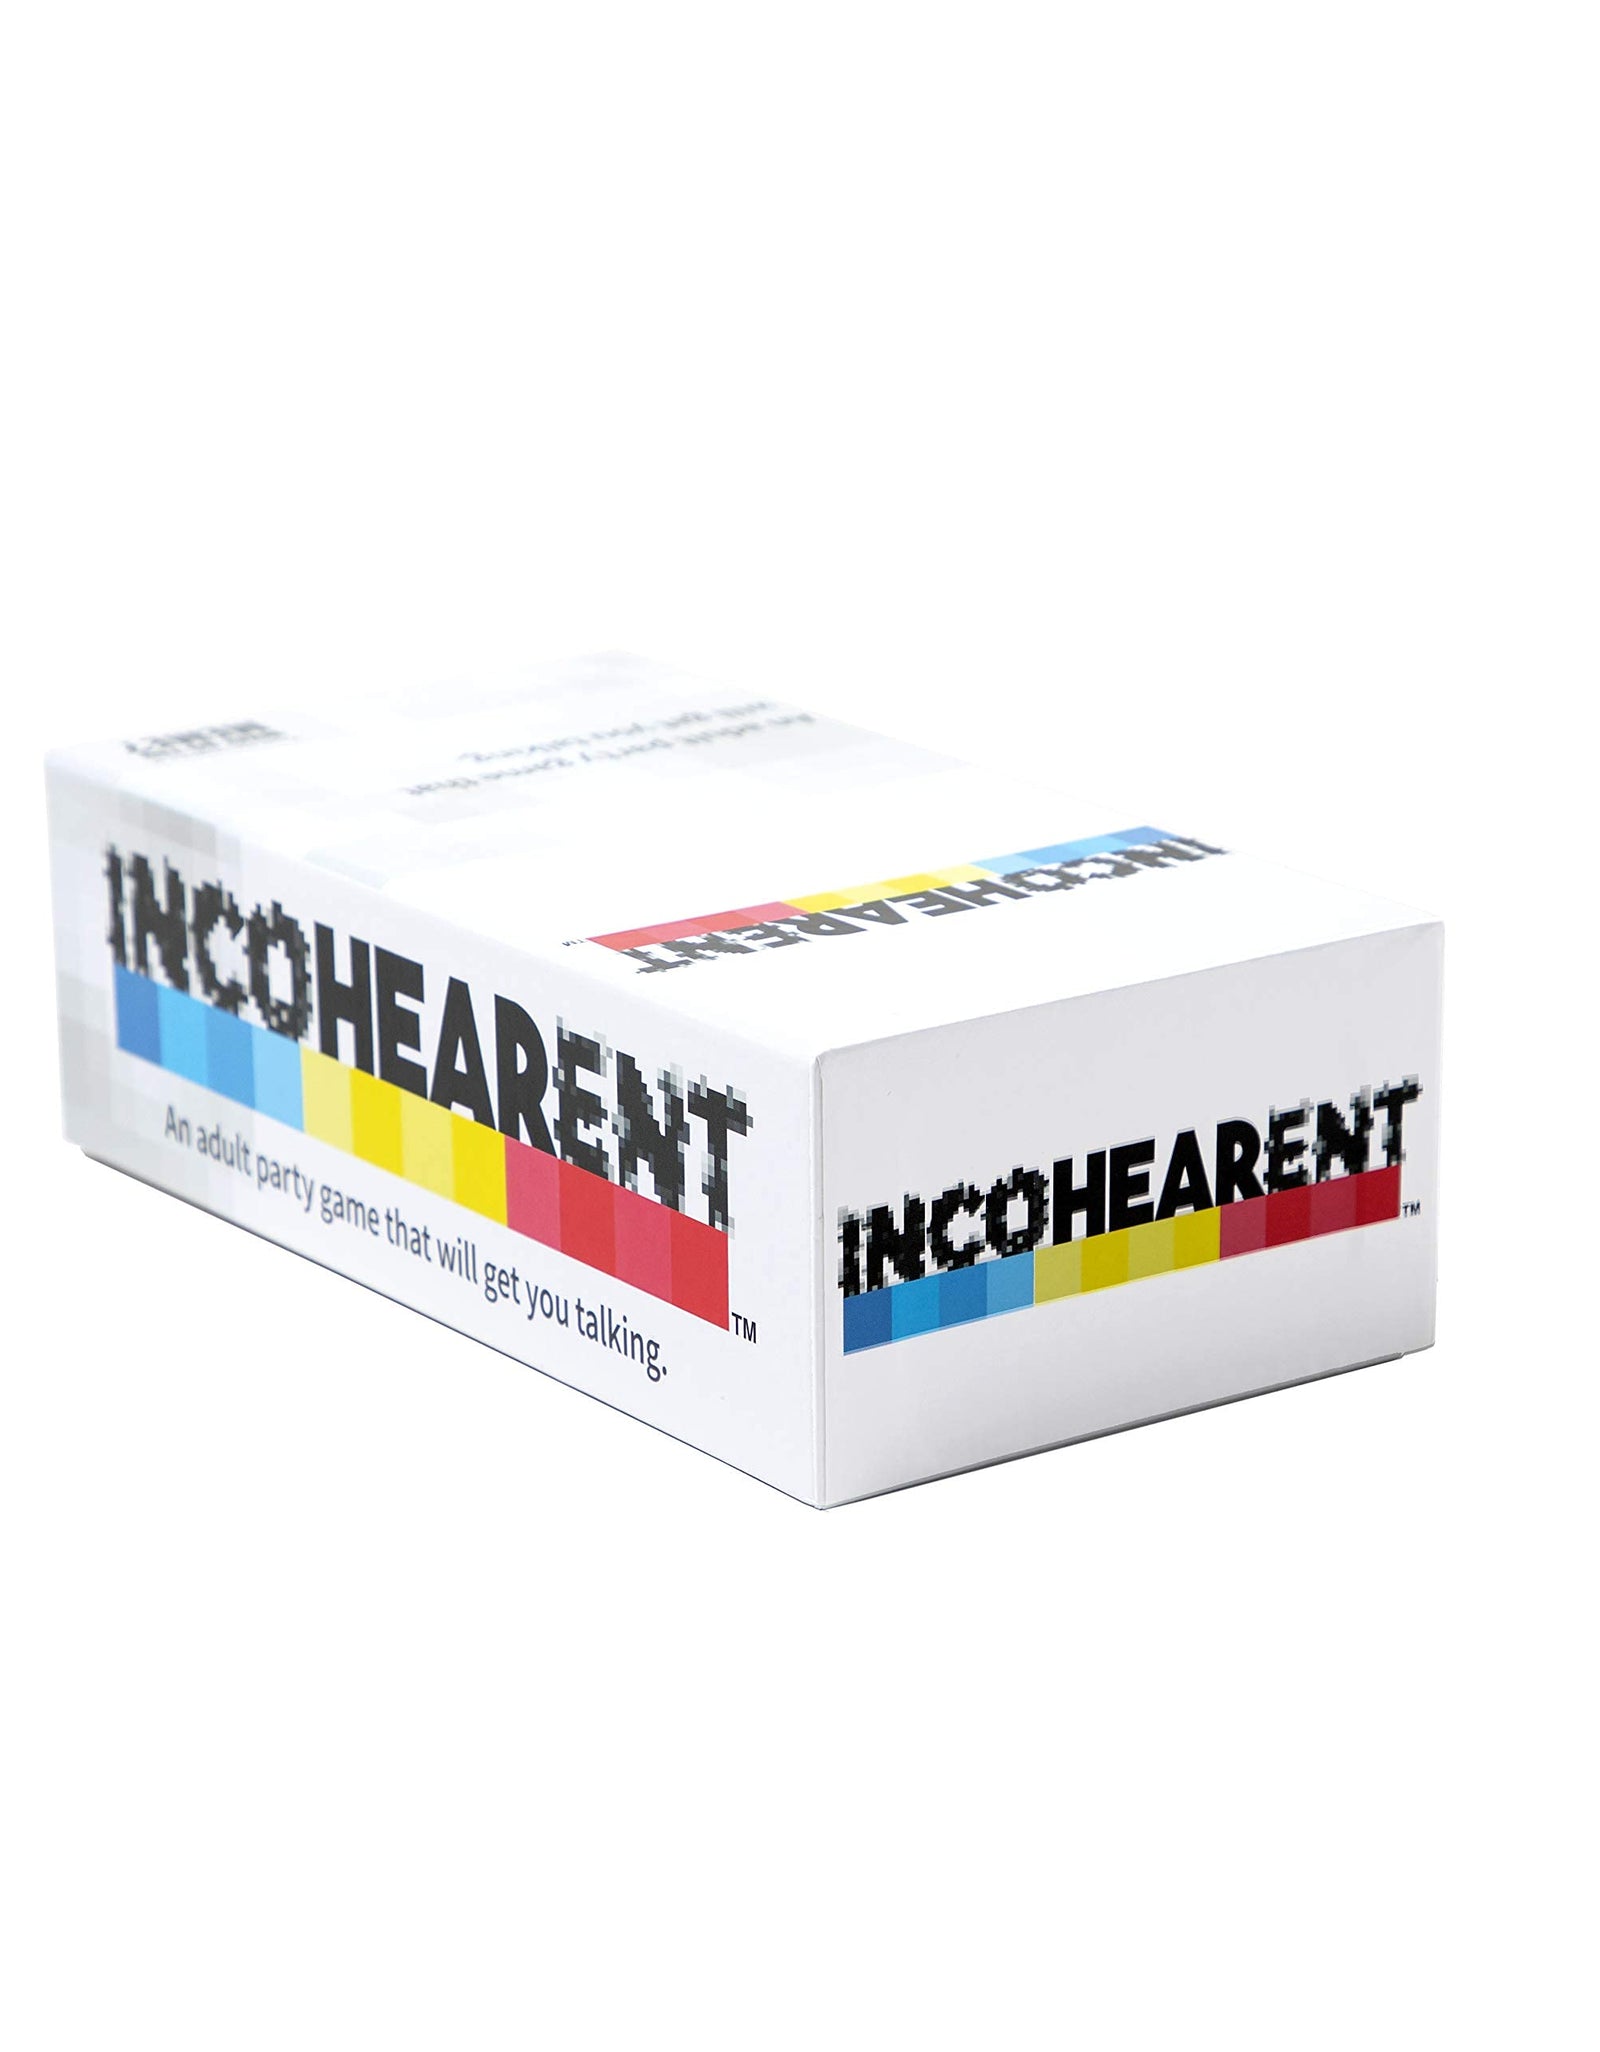 Incohearent - The Party Game Where You Compete to Guess The Gibberish - by What Do You Meme?